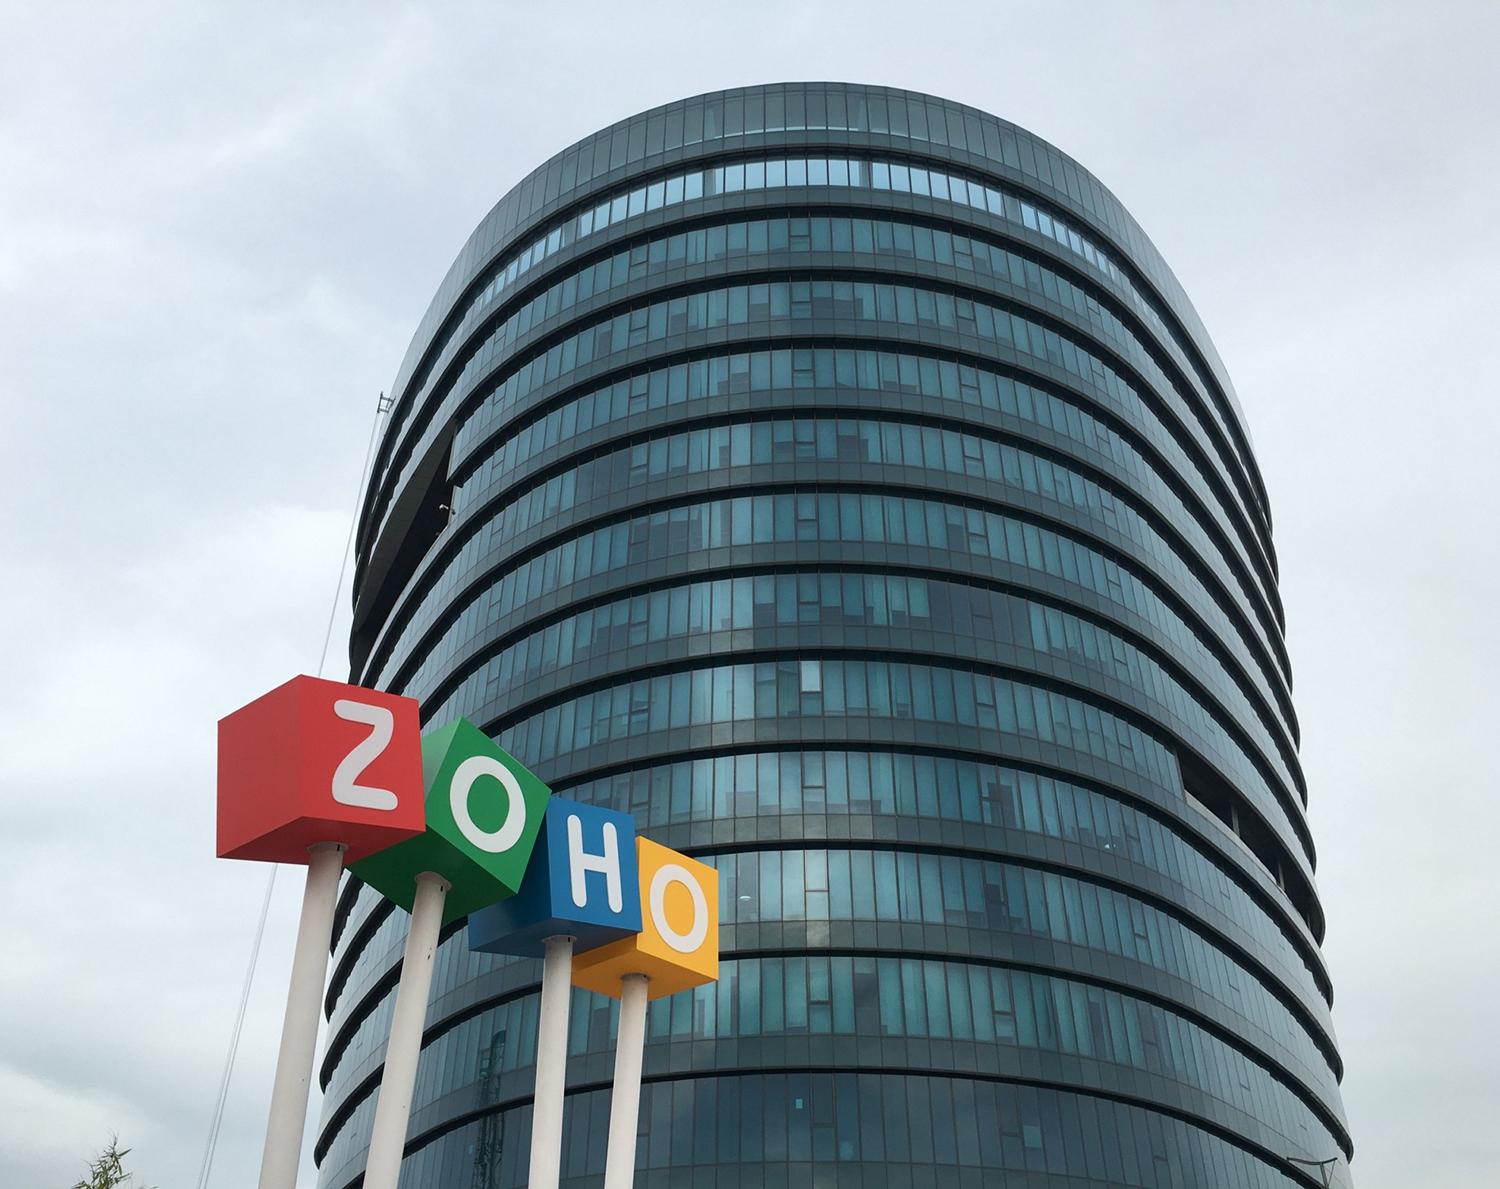 A vulnerability in the Zoho ManageEngine was added to CISA&#8217;s catalog of known exploited vulnerabilities. (&#8220;File:Zoho headquarters in chennai.jpg&#8221; by Samueljjohn is licensed under CC BY-SA 4.0.)